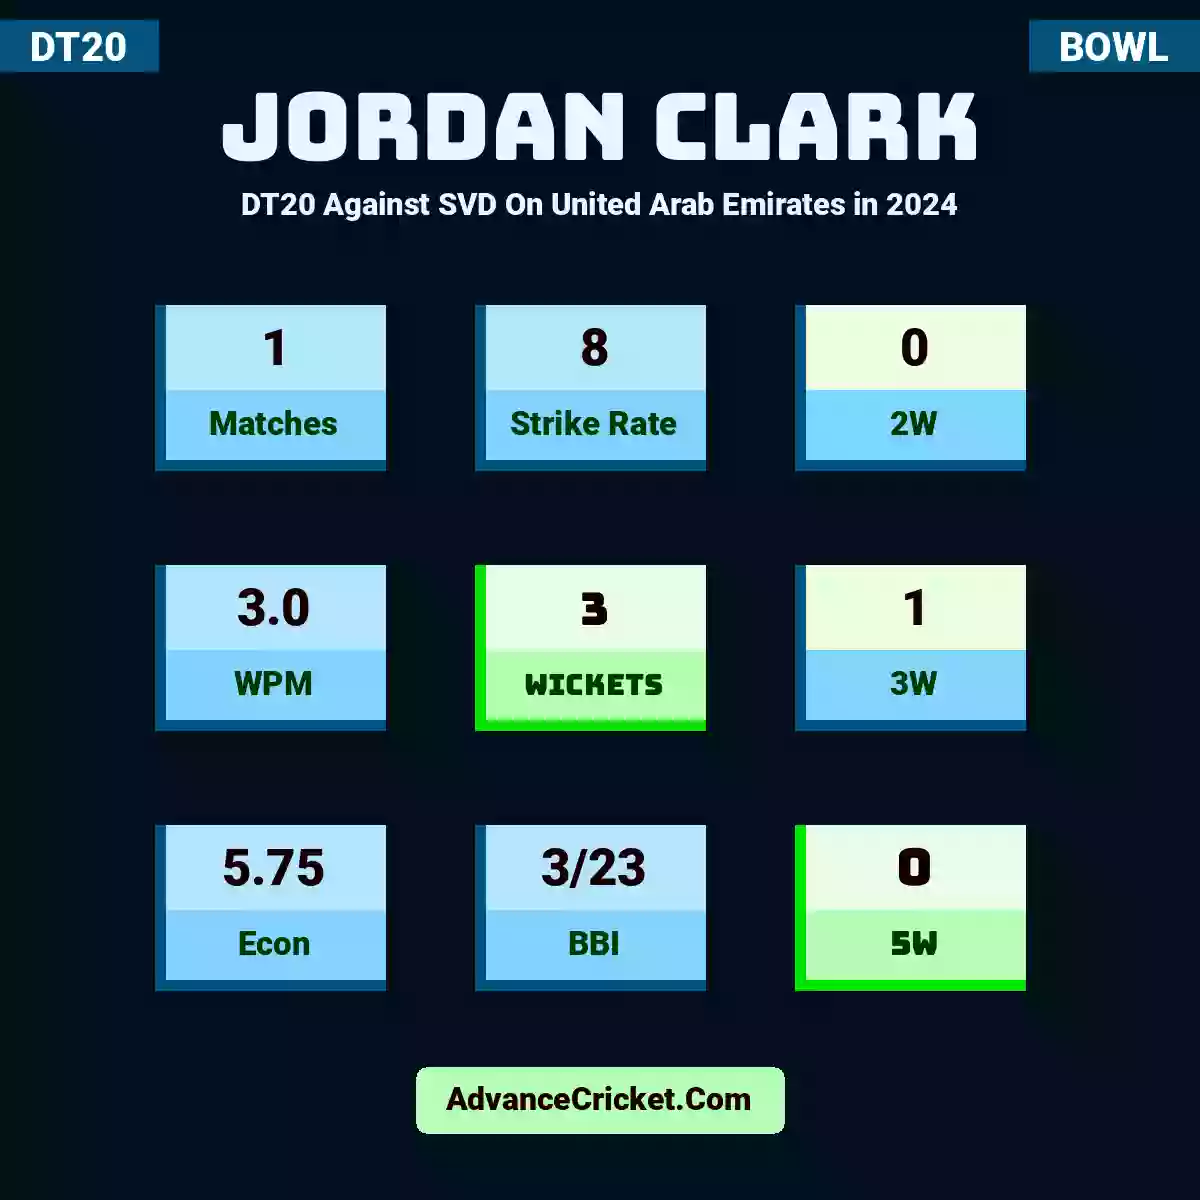 Jordan Clark DT20  Against SVD On United Arab Emirates in 2024, Jordan Clark played 1 match in this DT20 mode, with a SR of 8. J.Clark took 0 2W, with a WPM of 3.0. Jordan Clark secured 3 wickets, including 1 3W hauls, with an Econ of 5.75 and Avg of 7. Additionally, J.Clark achieved 0 5W hauls.